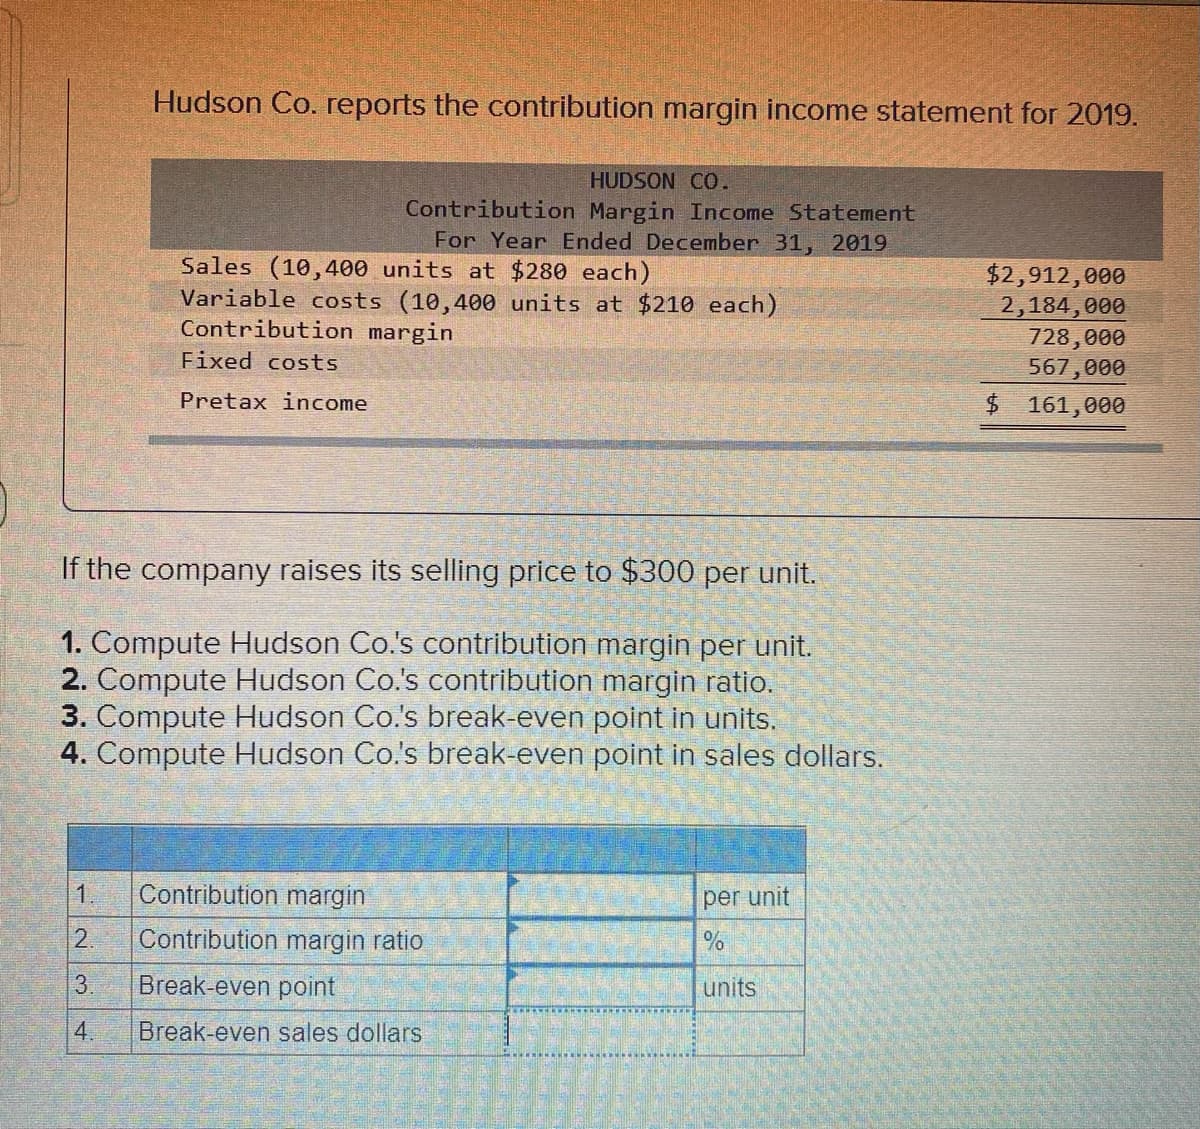 Hudson Co. reports the contribution margin income statement for 2019.
HUDSON CO.
Contribution Margin Income Statement
For Year Ended December 31, 2019
Sales (10,400 units at $280 each)
Variable costs (10,400 units at $210 each)
Contribution margin
$2,912,000
2,184,000
728,000
567,000
$ 161,000
Fixed costs
Pretax income
If the company raises its selling price to $300 per unit.
1. Compute Hudson Co.'s contribution margin per unit.
2. Compute Hudson Co.'s contribution margin ratio.
3. Compute Hudson Co.'s break-even point in units.
4. Compute Hudson Co's break-even point in sales dollars.
1.
Contribution margin
per unit
2.
Contribution margin ratio
3.
Break-even point
units
4.
Break-even sales dollars
